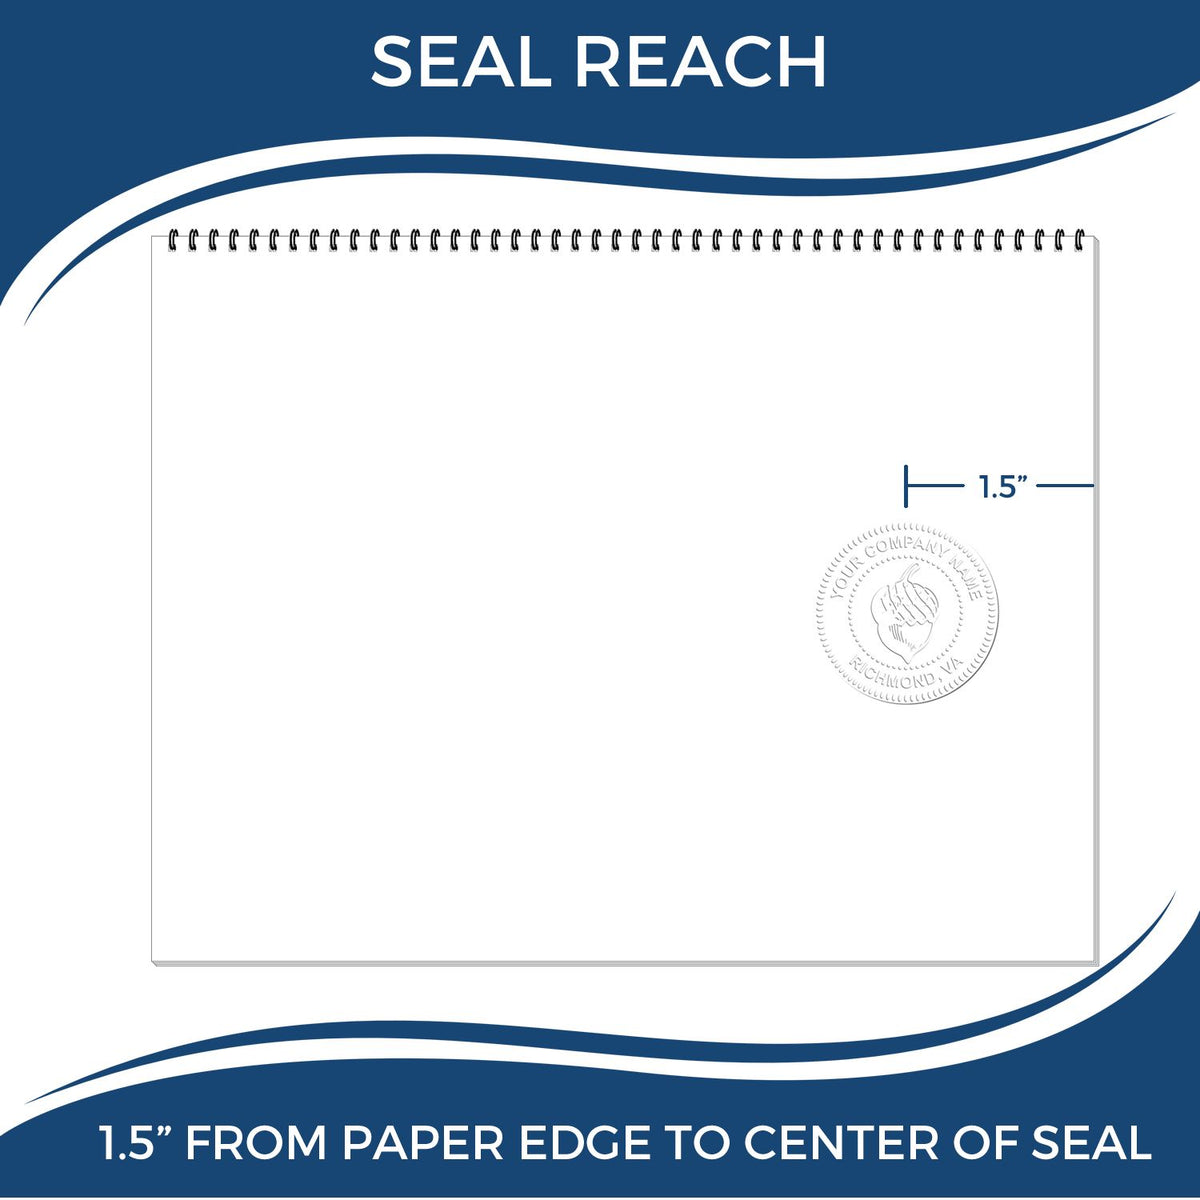 An infographic showing the seal reach which is represented by a ruler and a miniature seal image of the Hybrid North Dakota Architect Seal